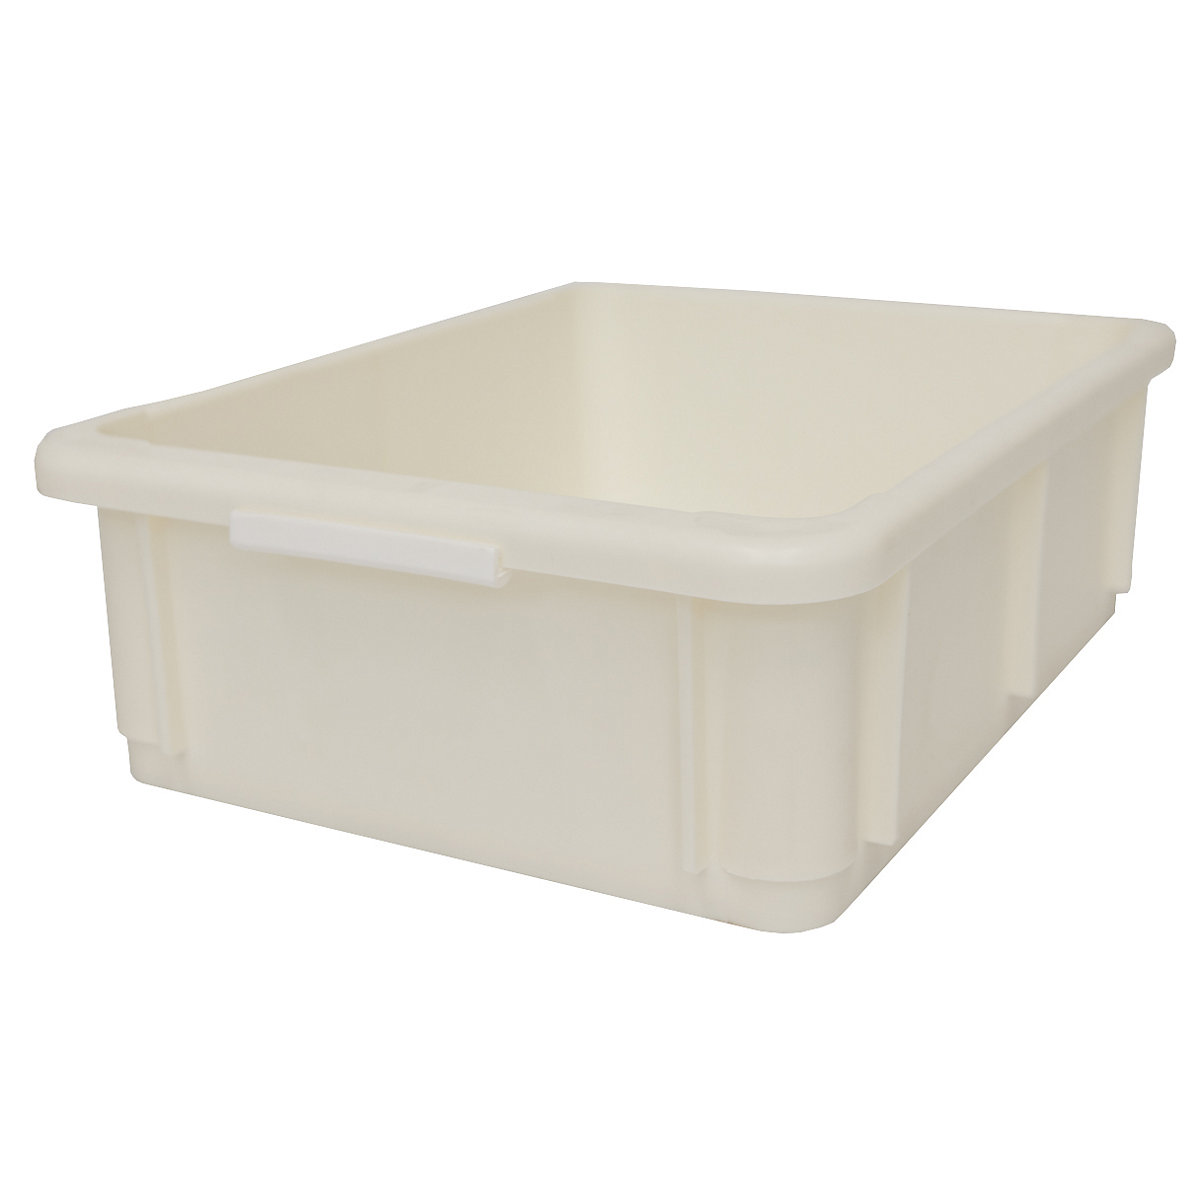 Stacking container made of polypropylene